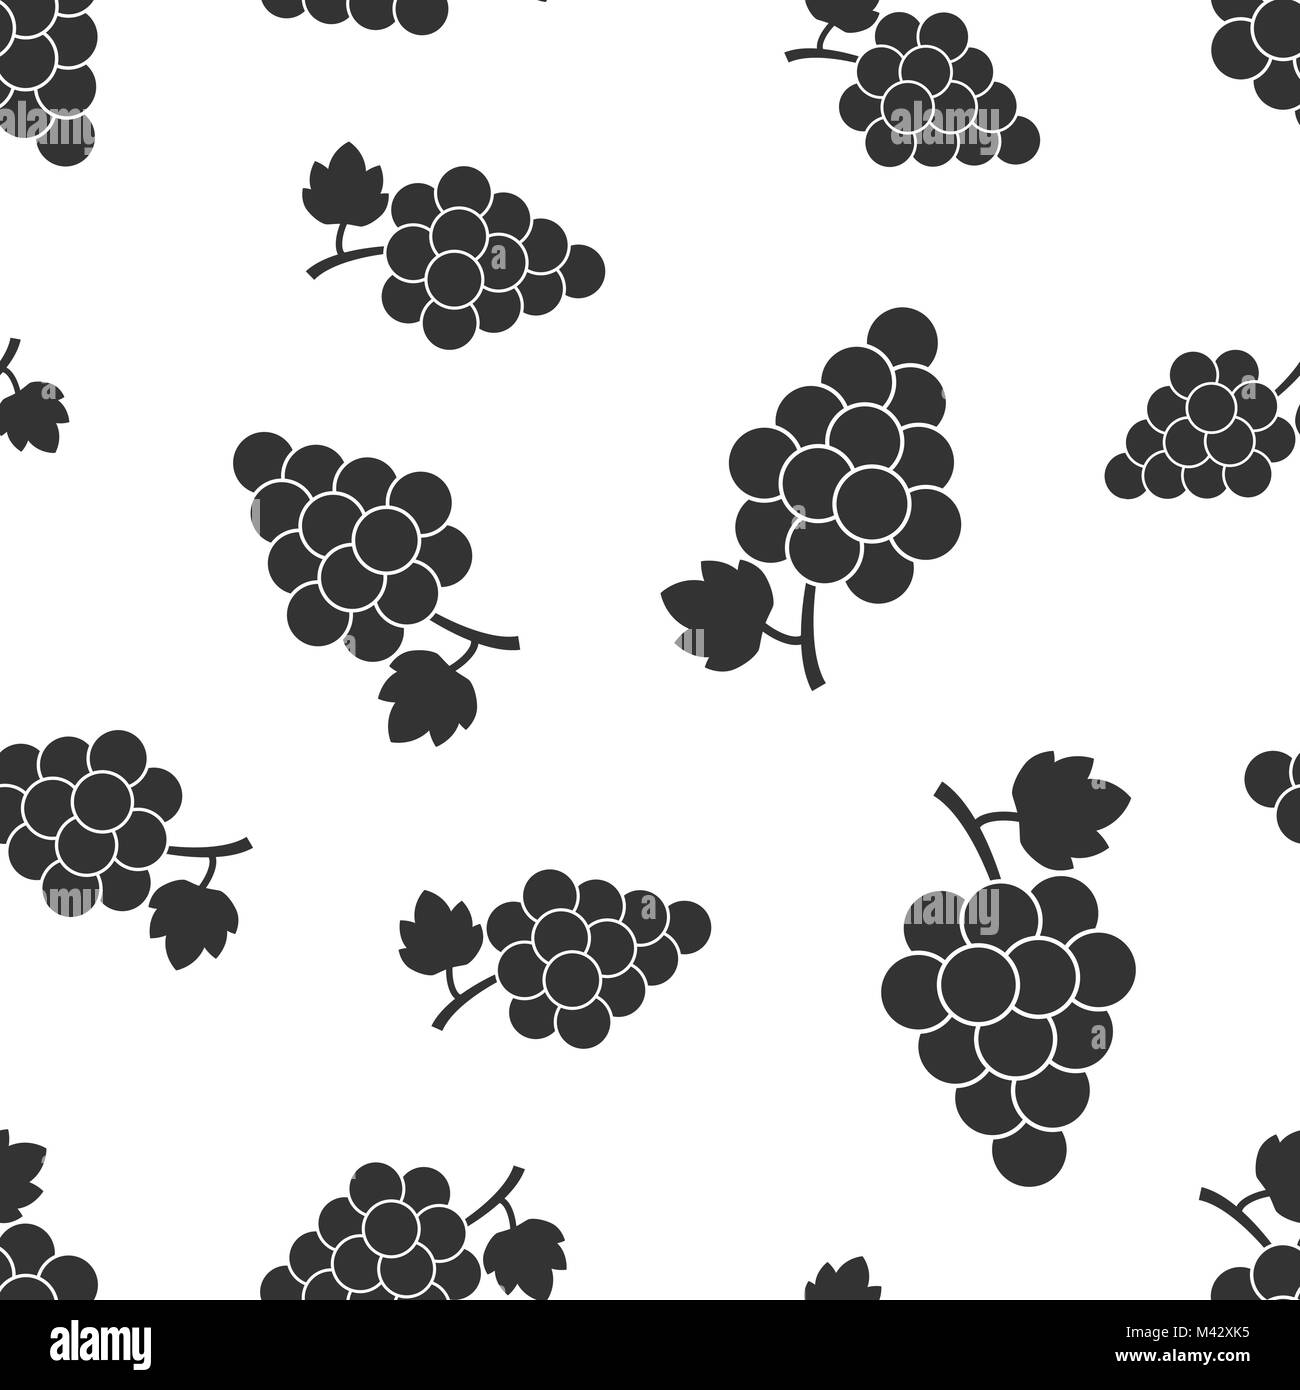 Grape fruit with leaf seamless pattern background. Business concept vector illustration. Bunch of wine grapevine symbol pattern. Stock Vector